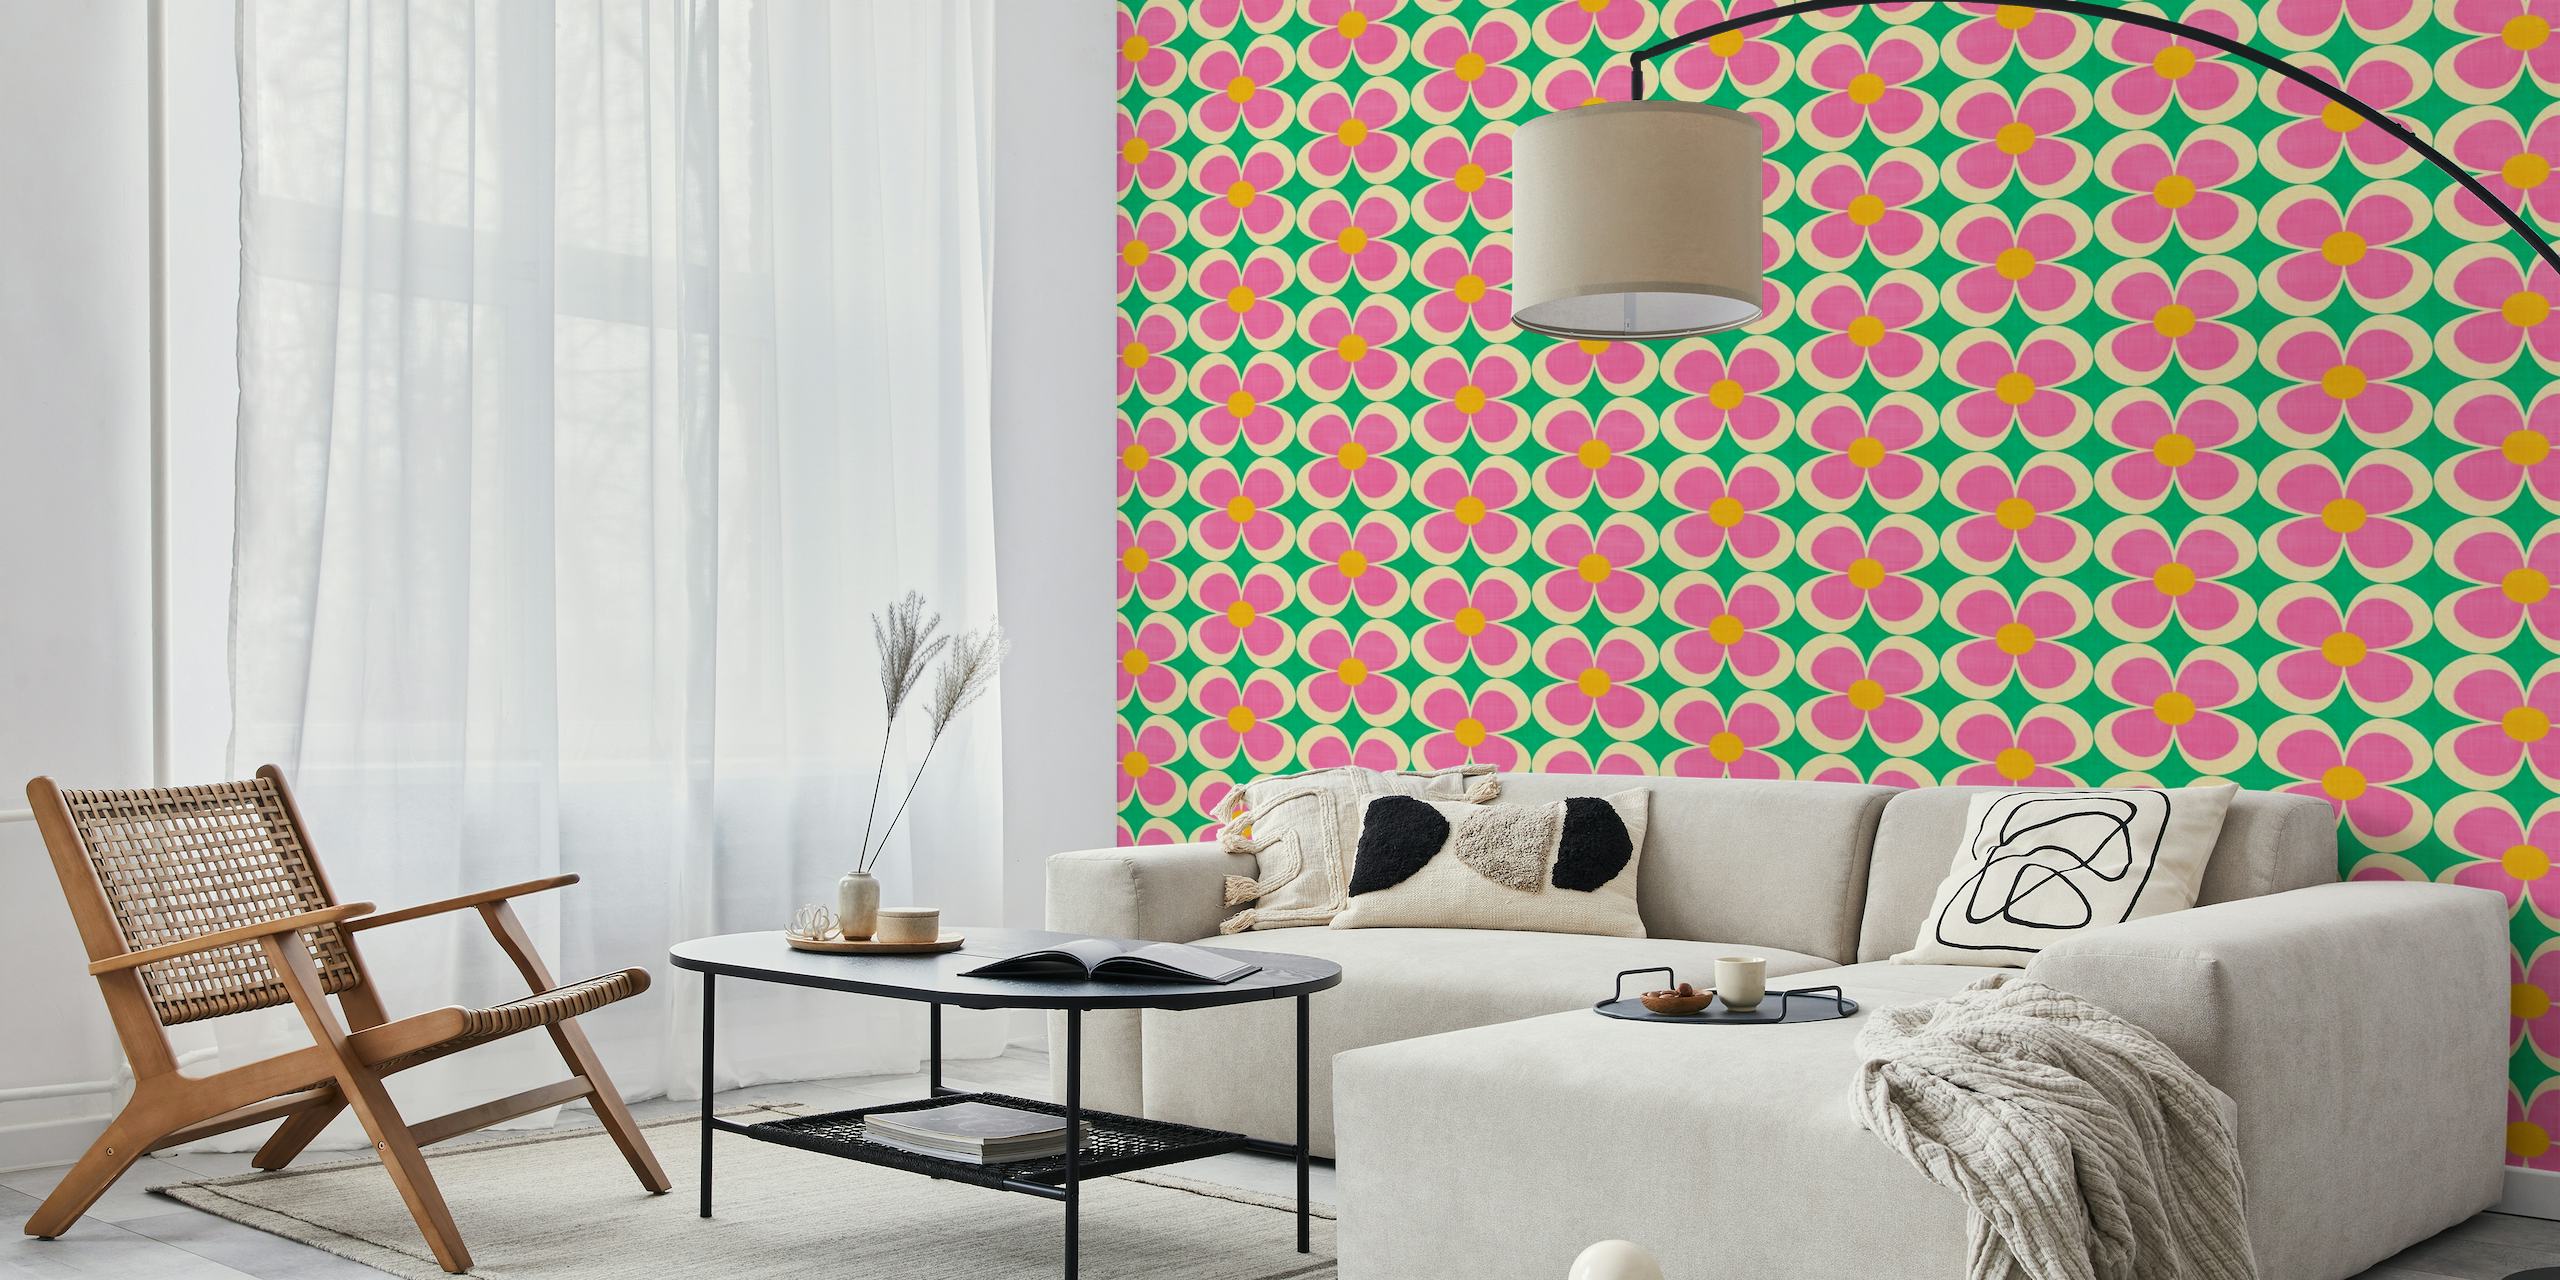 Groovy Geometric Floral Pink and Green Small ταπετσαρία